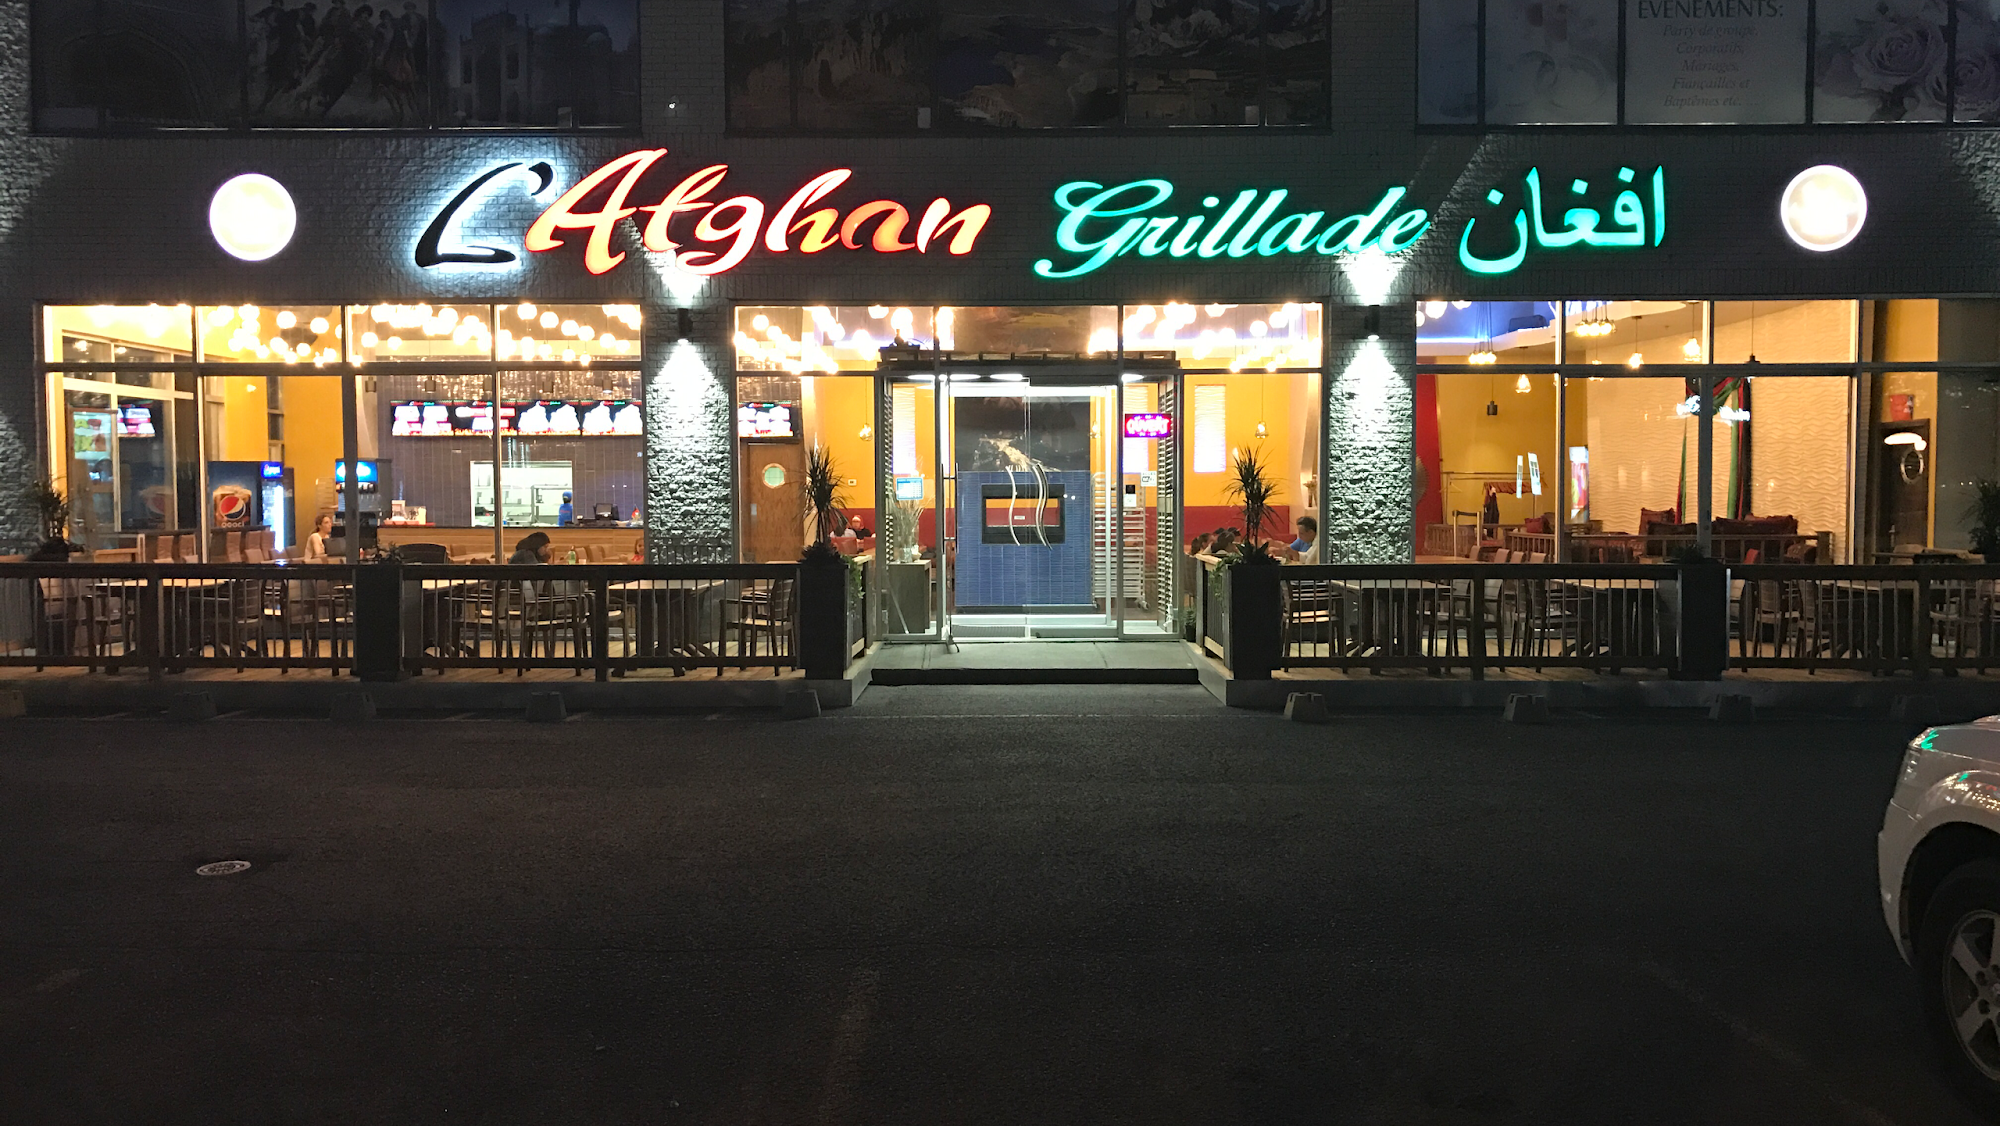 L'AFGHAN GRILLADE - Kababs /Shish-taouk / Burgers / Poutine - Halal - Livraison / Delivery / Takeout / Catering